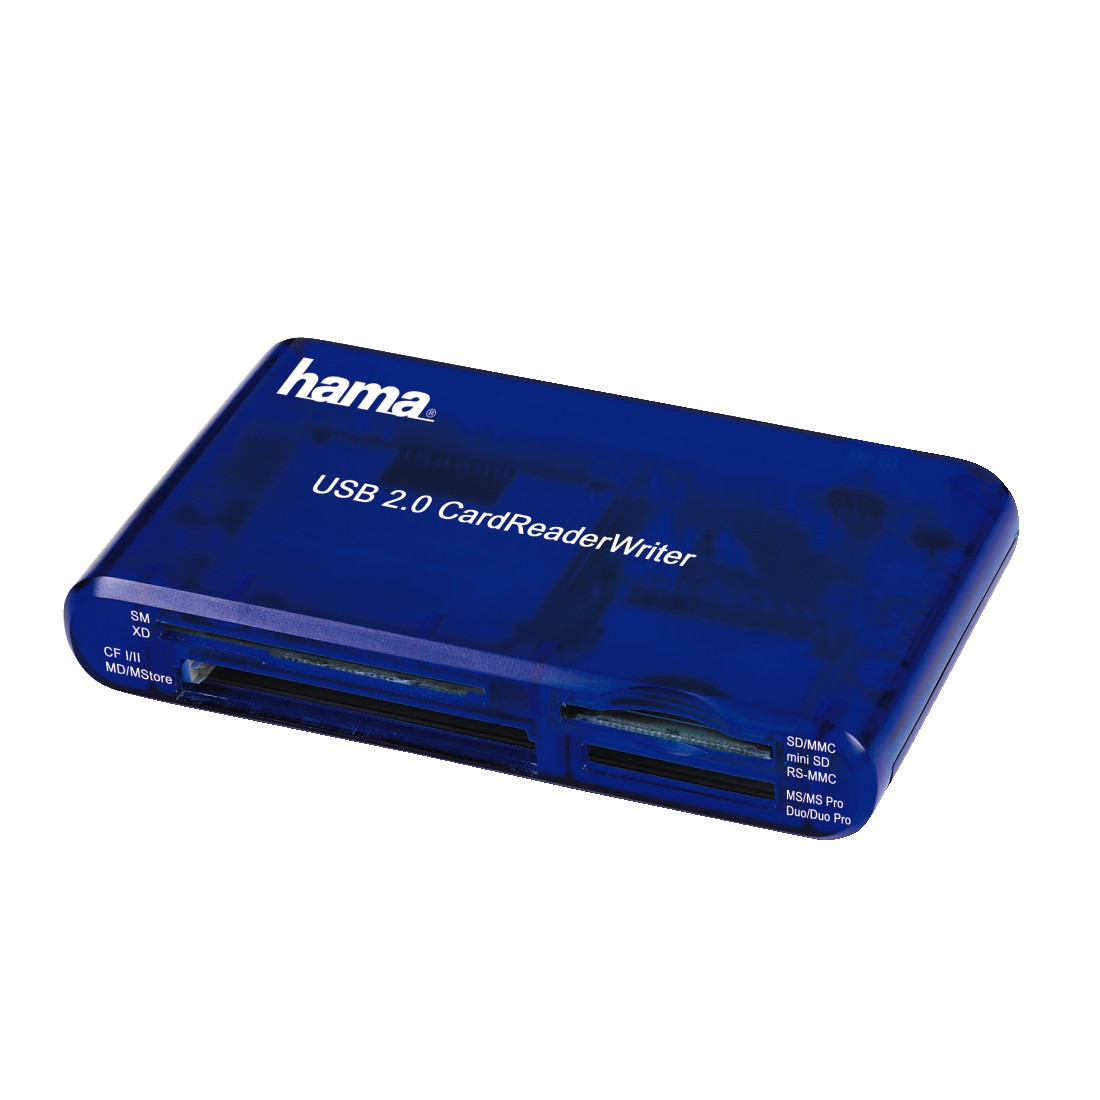 You Recently Viewed Hama 35in1 USB 2.0 Multi Card Reader Image